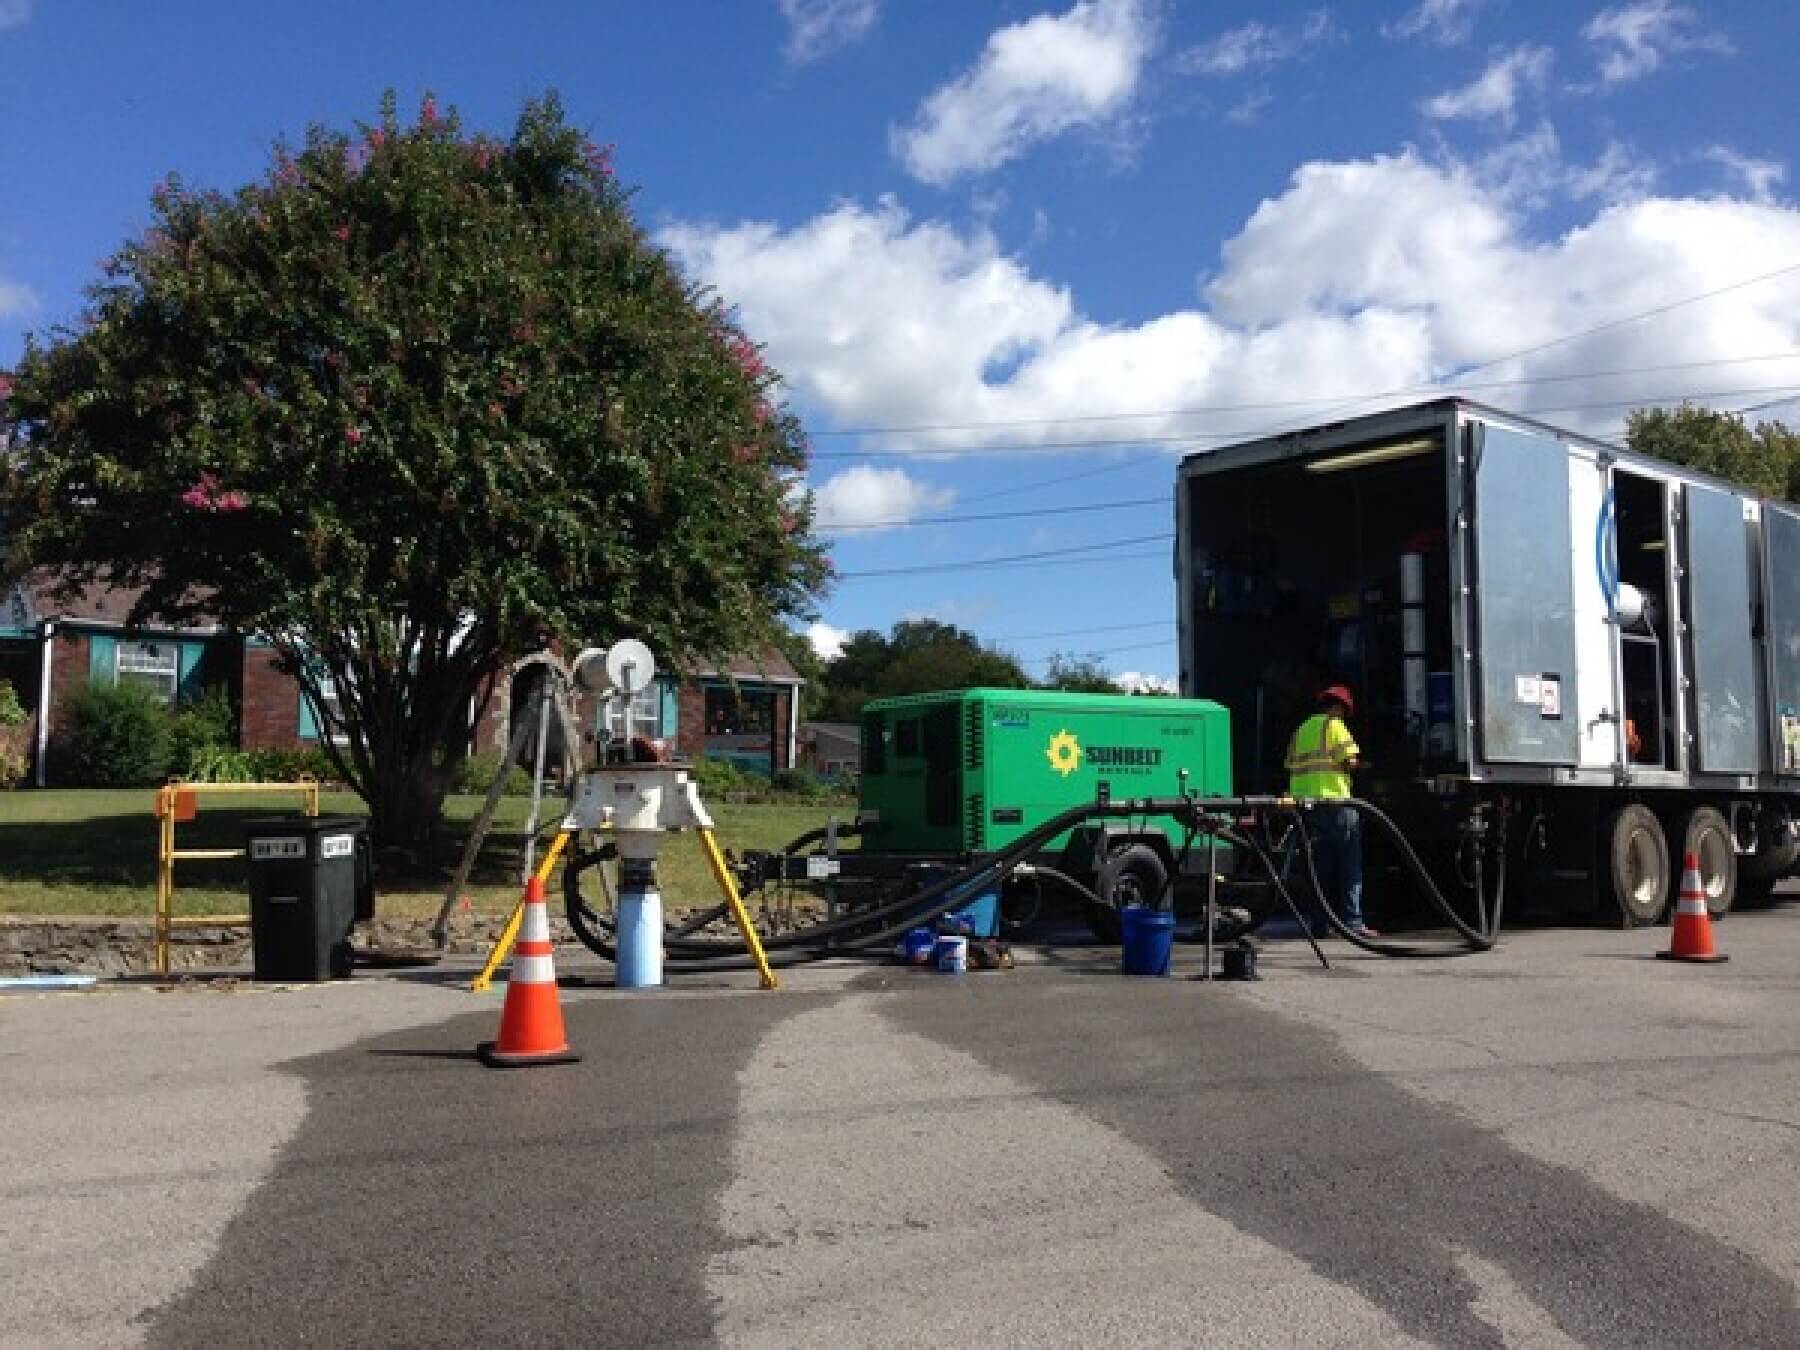 A green diesel generator and truck seen carrying out sewer rehab.